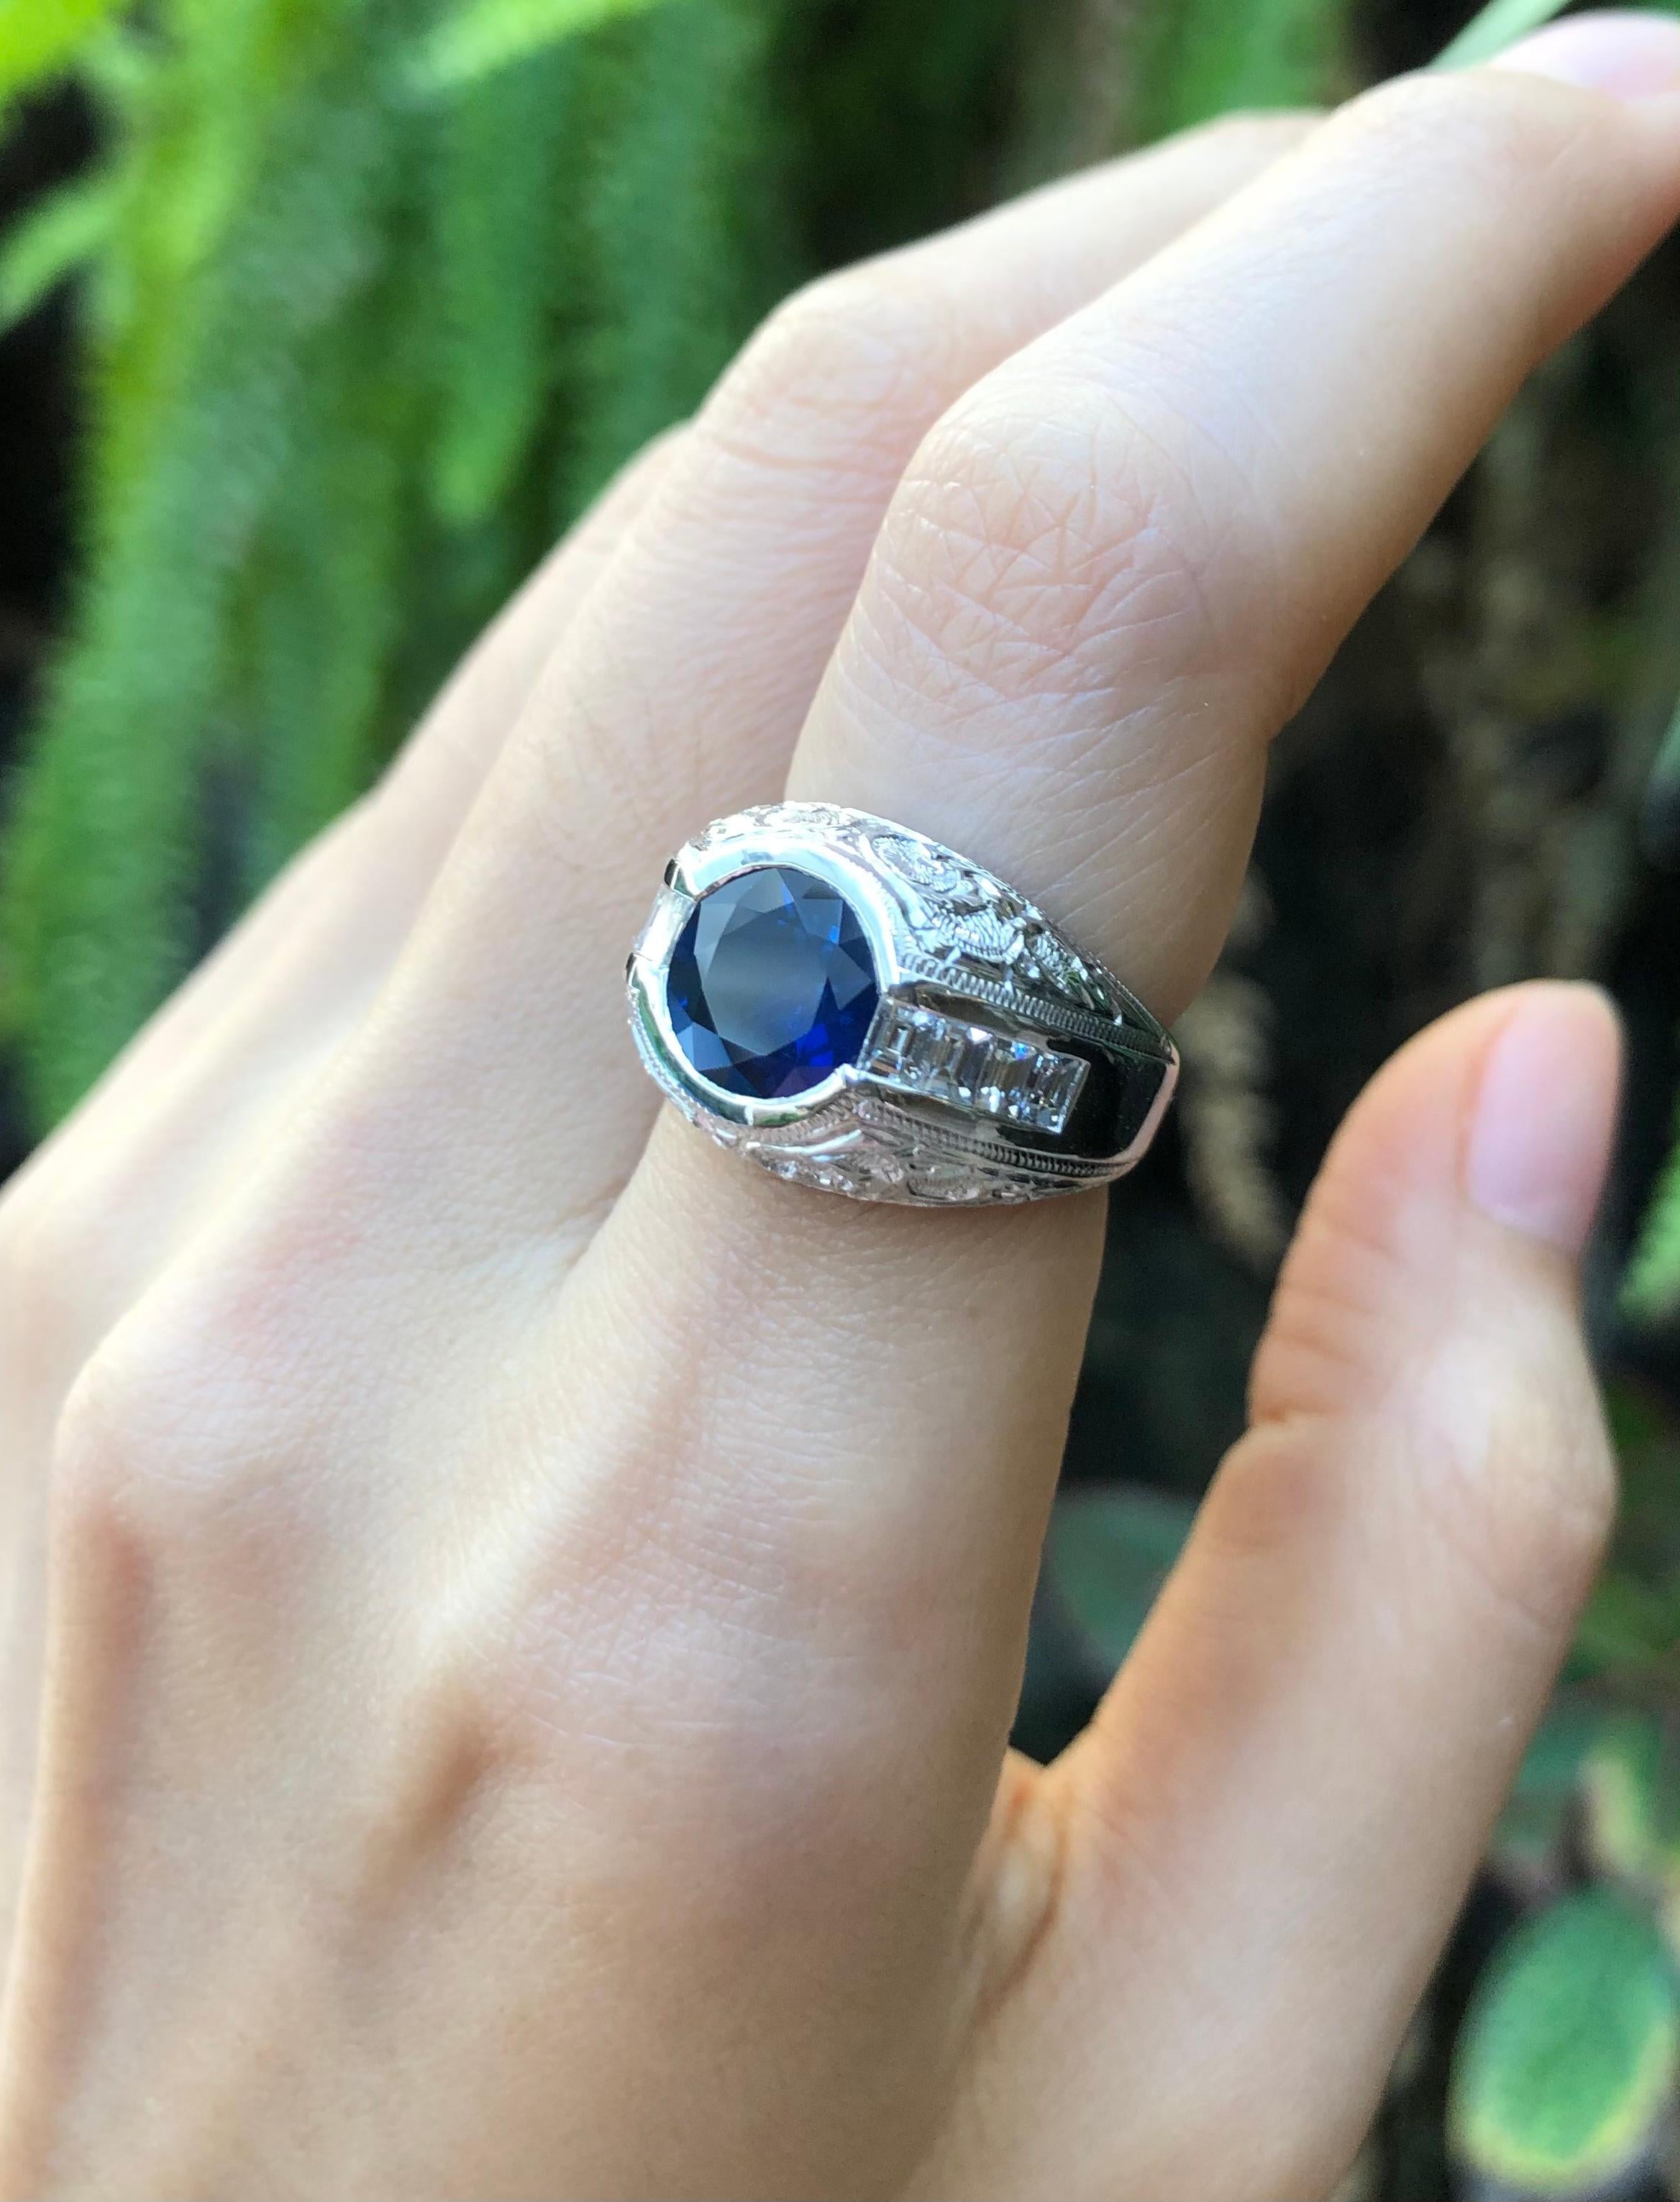 Mixed Cut Round Cut Blue Sapphire, Diamond with Engraving Ring Set in Platinum 950 For Sale